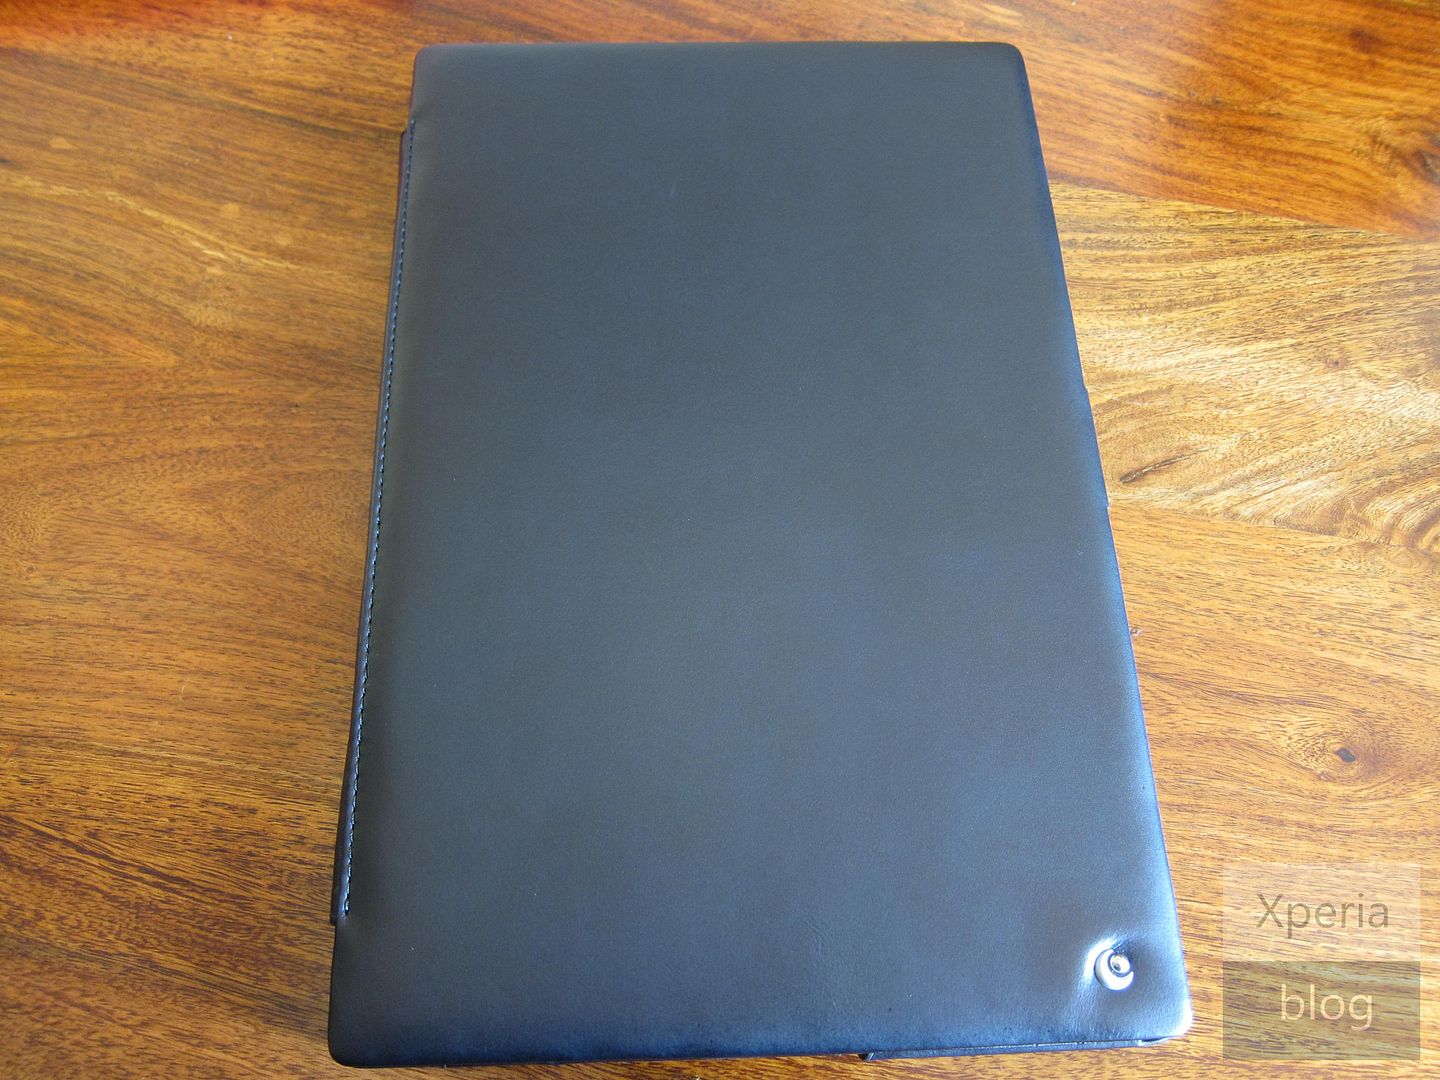 Noreve Xperia Tablet Z case review